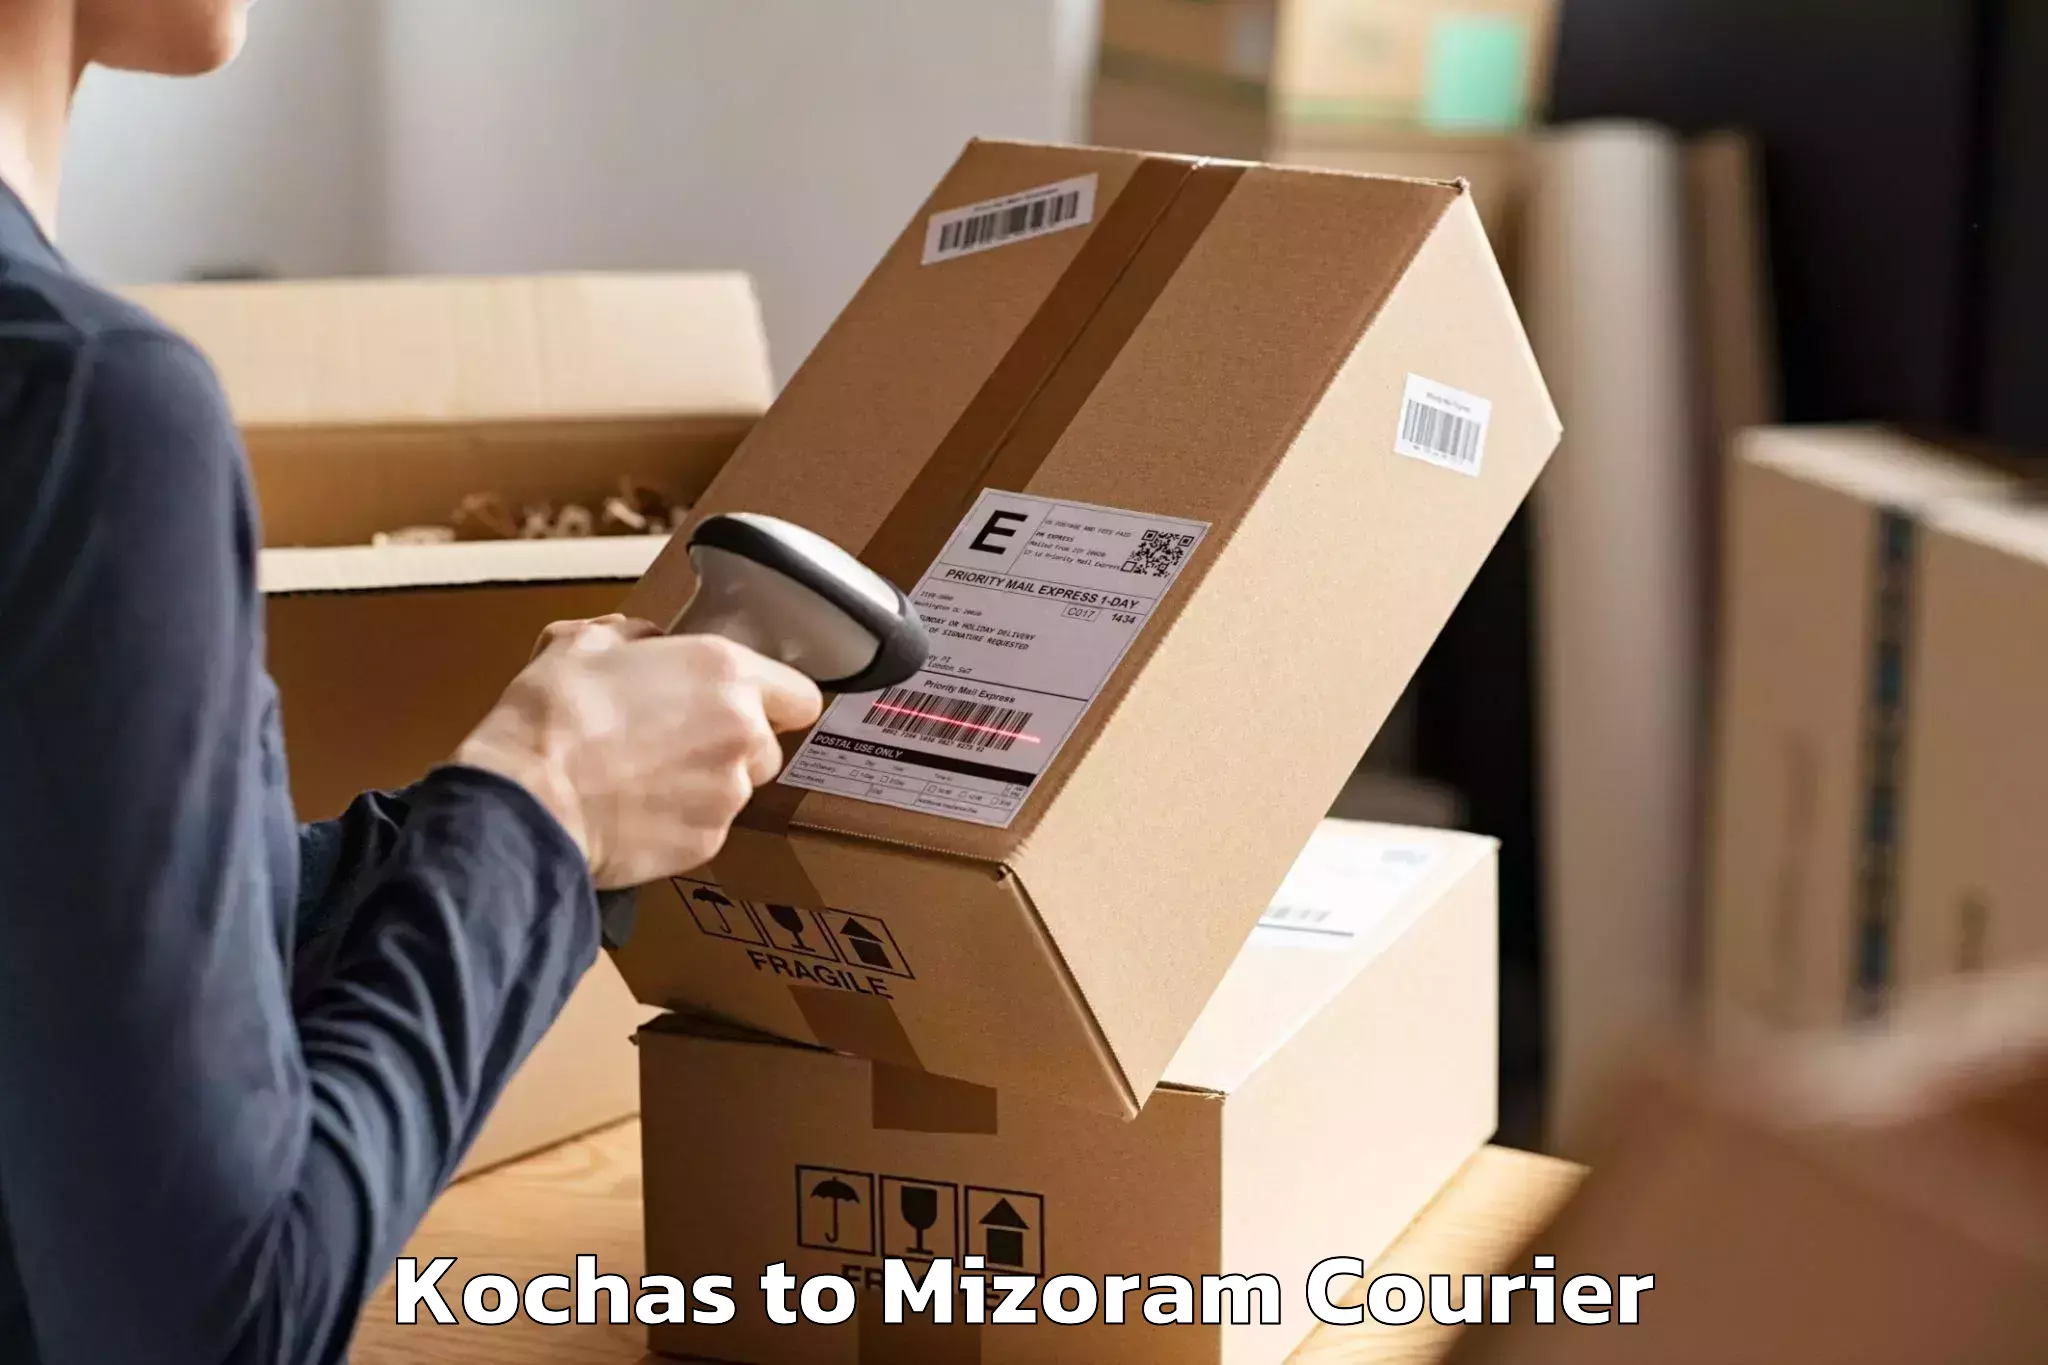 Professional relocation services in Kochas to Darlawn